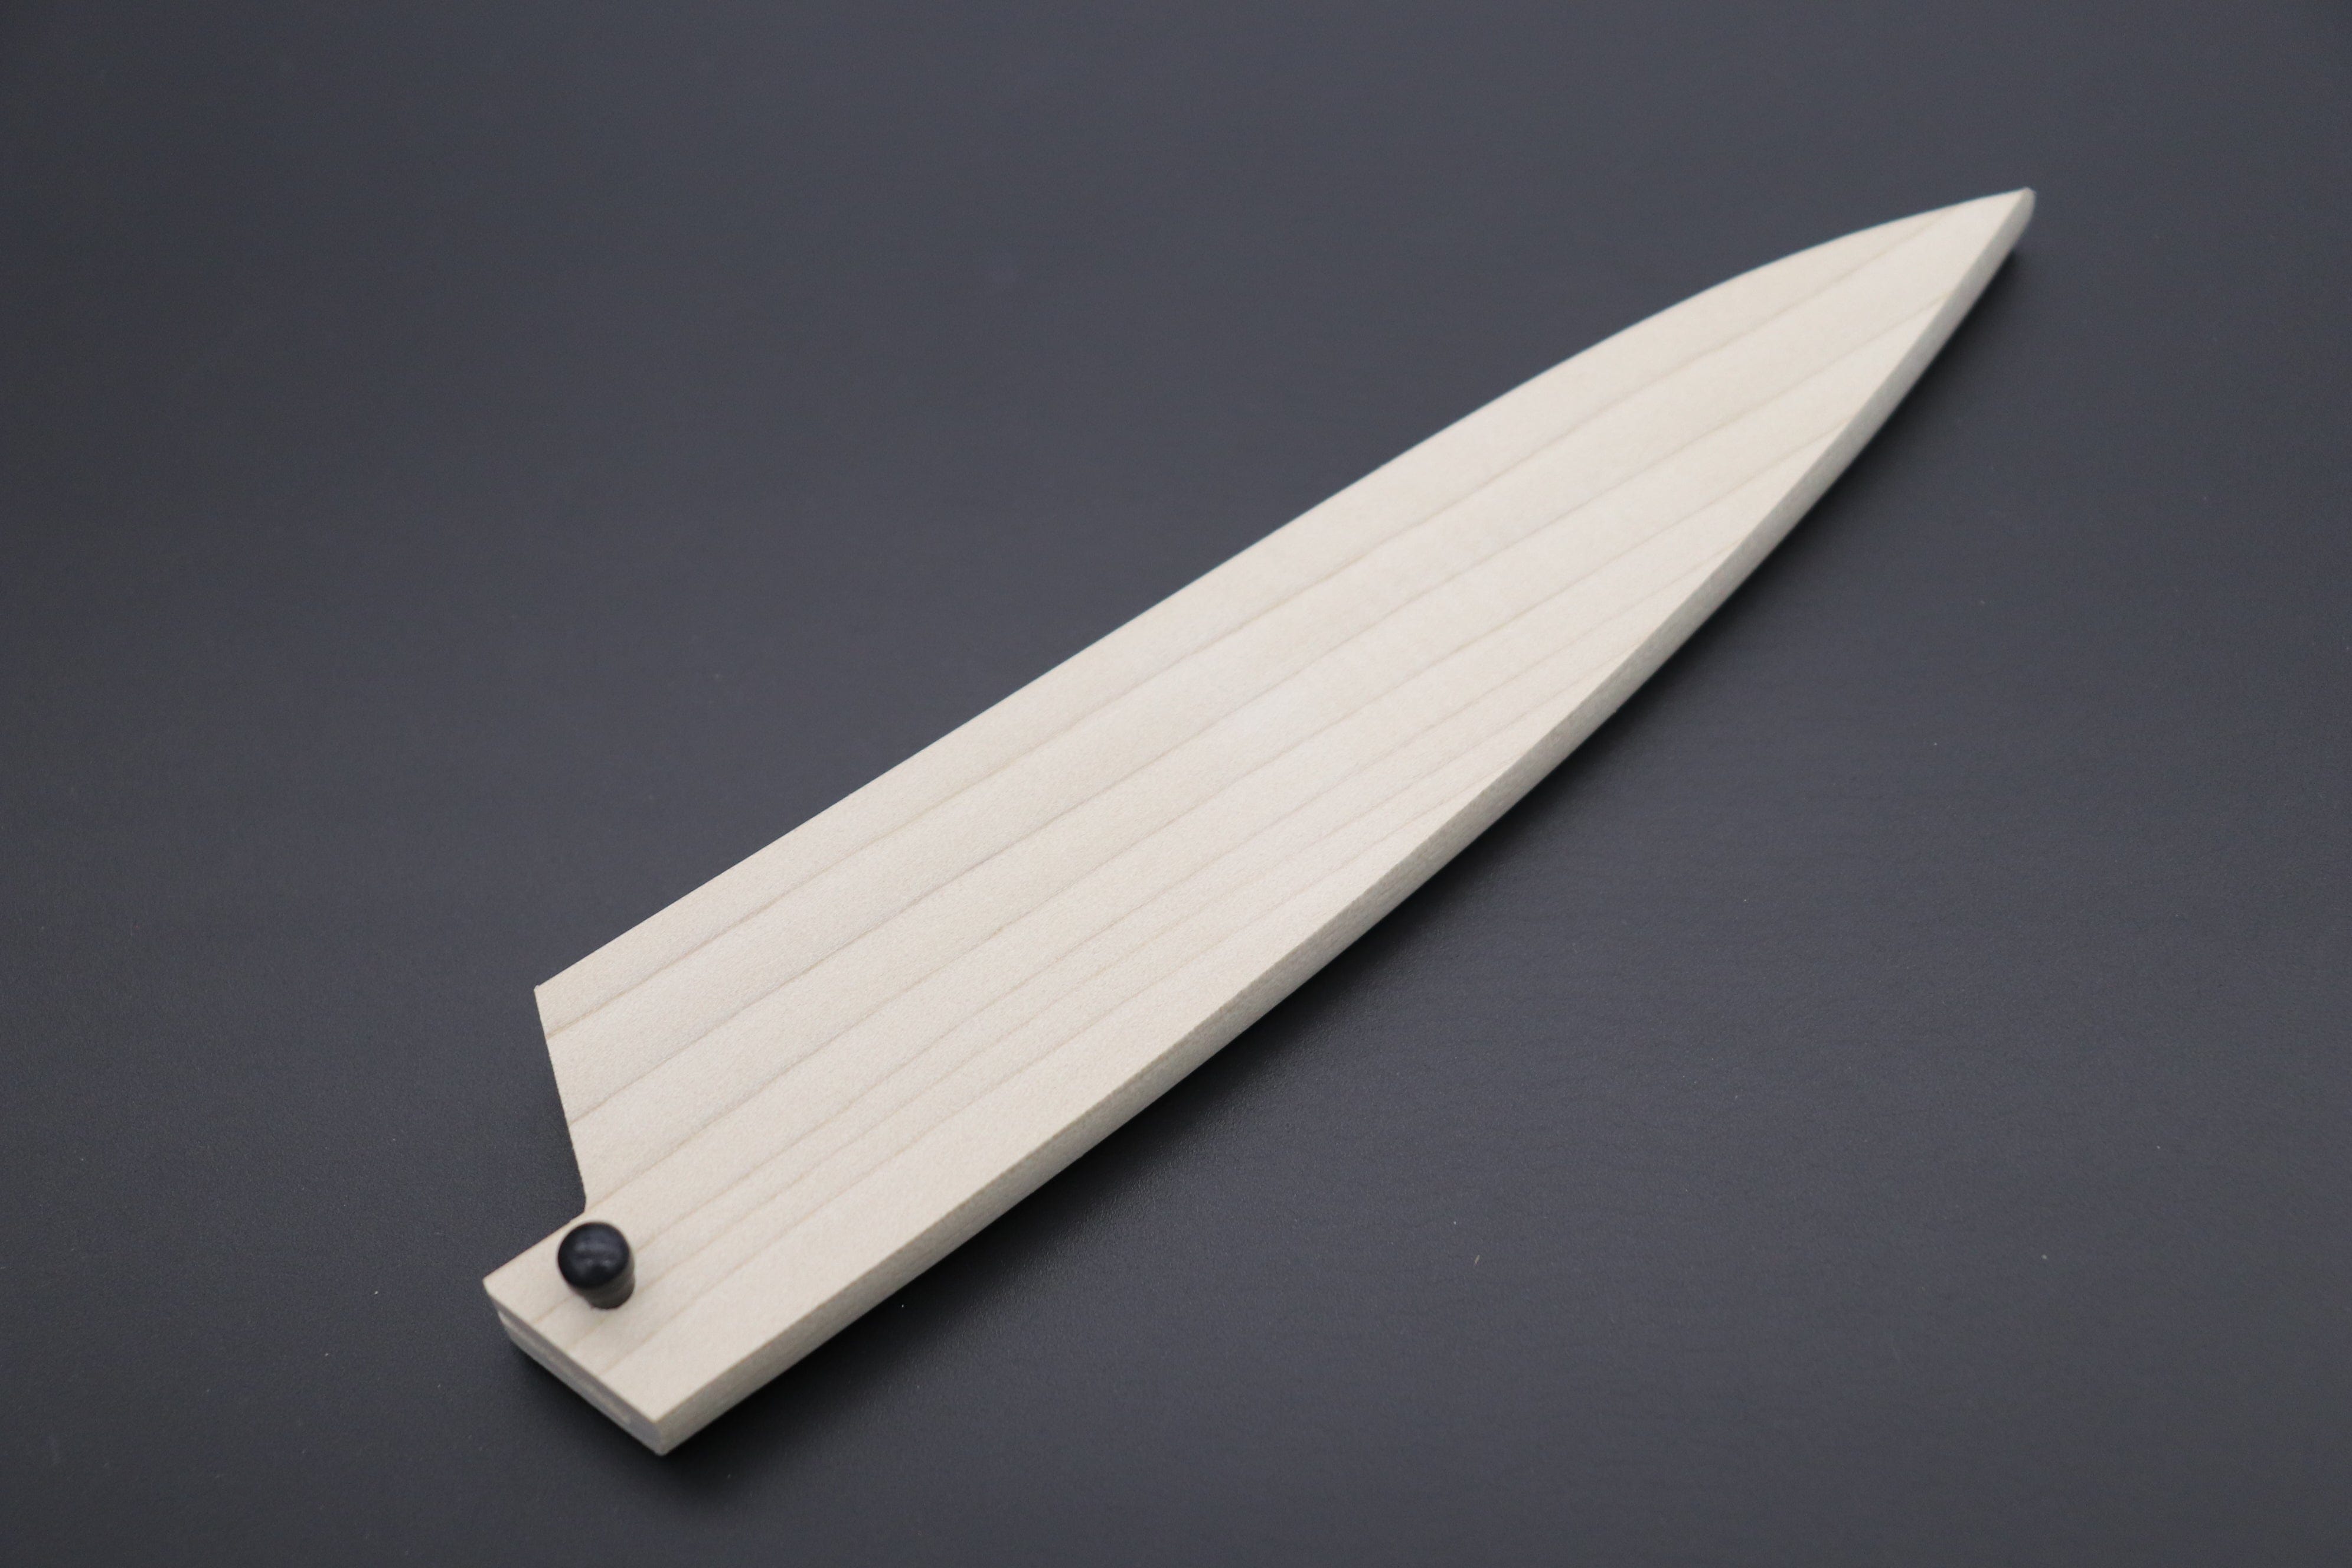 https://japanesechefsknife.com/cdn/shop/files/others-accessories-magnolia-wooden-saya-for-misono-ux10-no-732-petty-130mm-ux10-dimples-no-772-petty130mm-43029175173403.jpg?v=1696301501